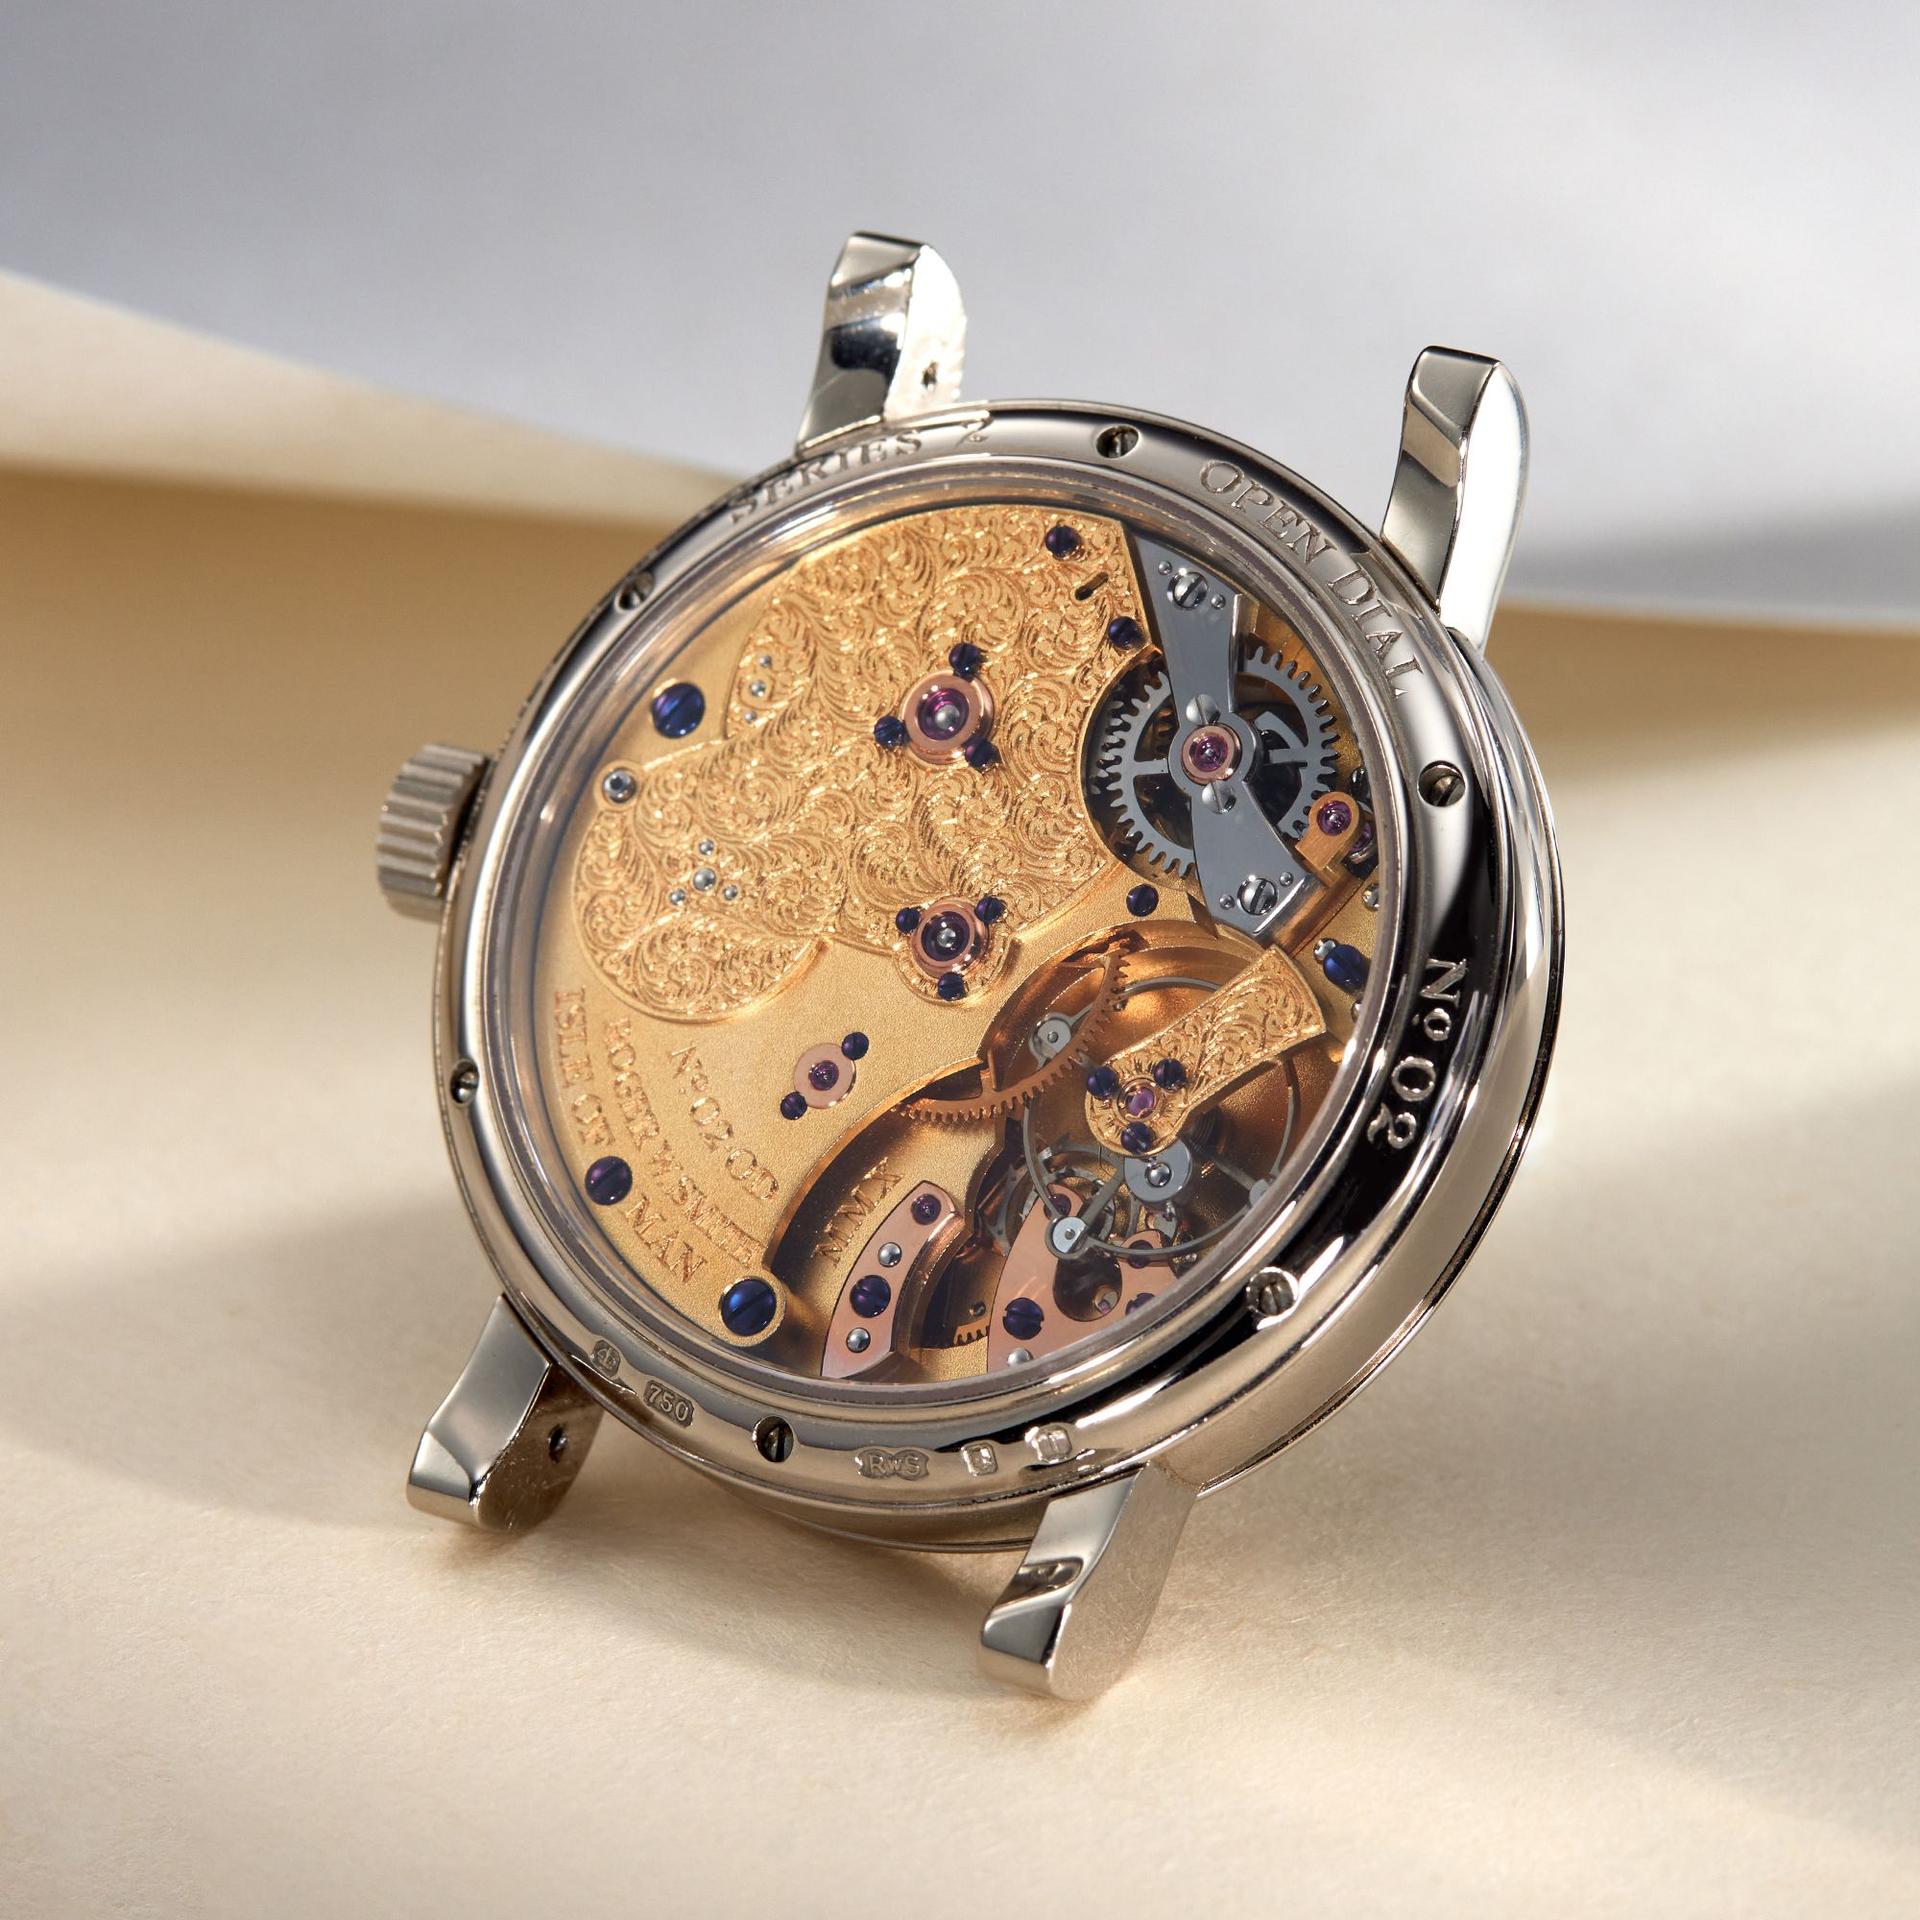 Roger W. Smith's First Series 2 Open Dial Watch Housed In A Prototype 40mm White Gold Case